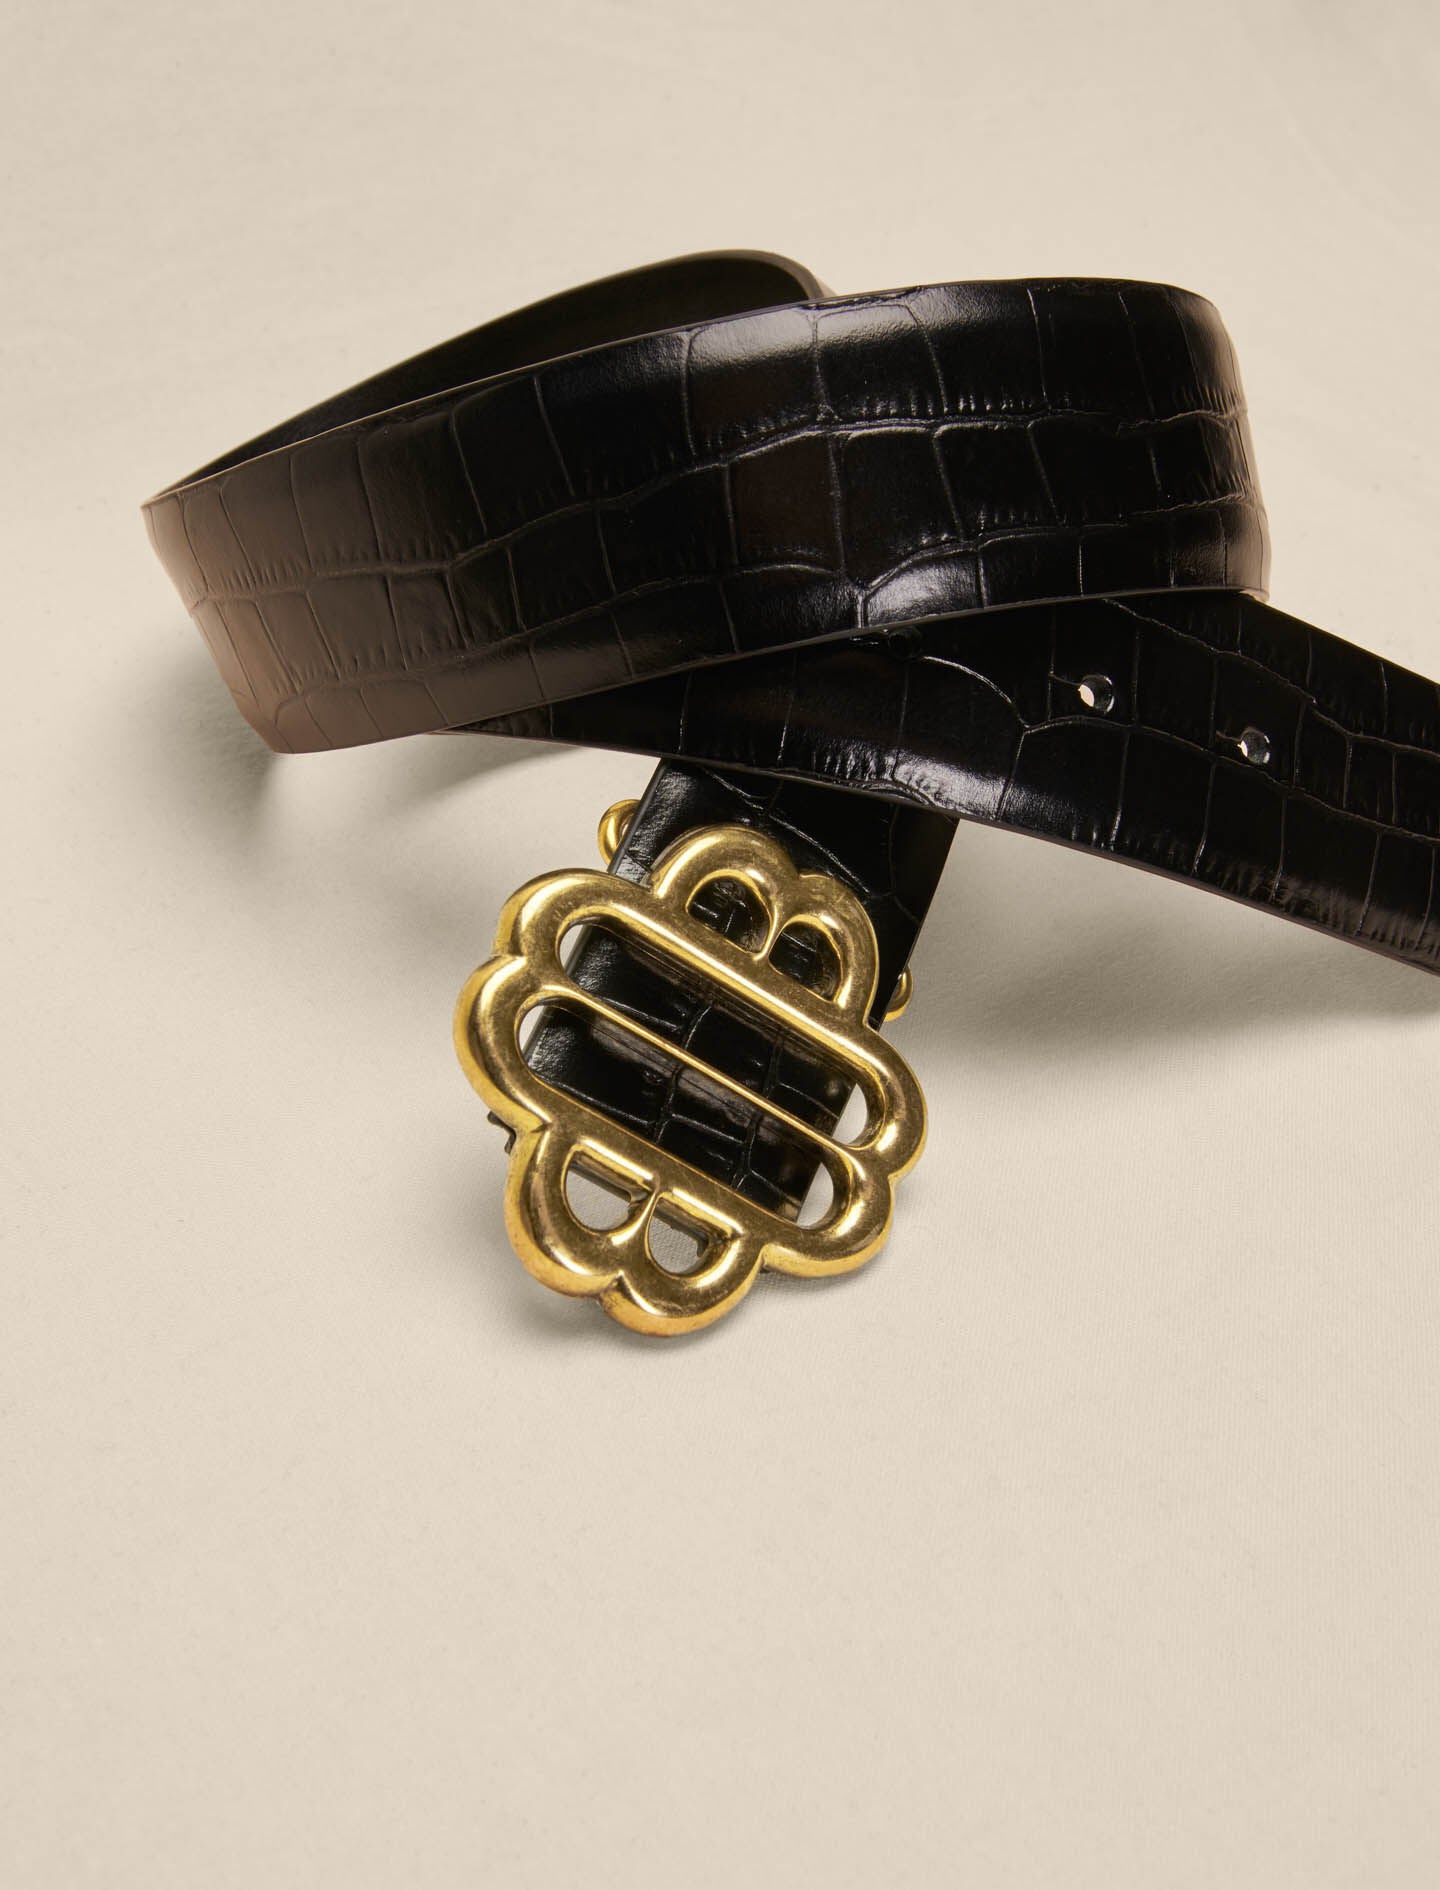 Black-leather belt with clover buckle